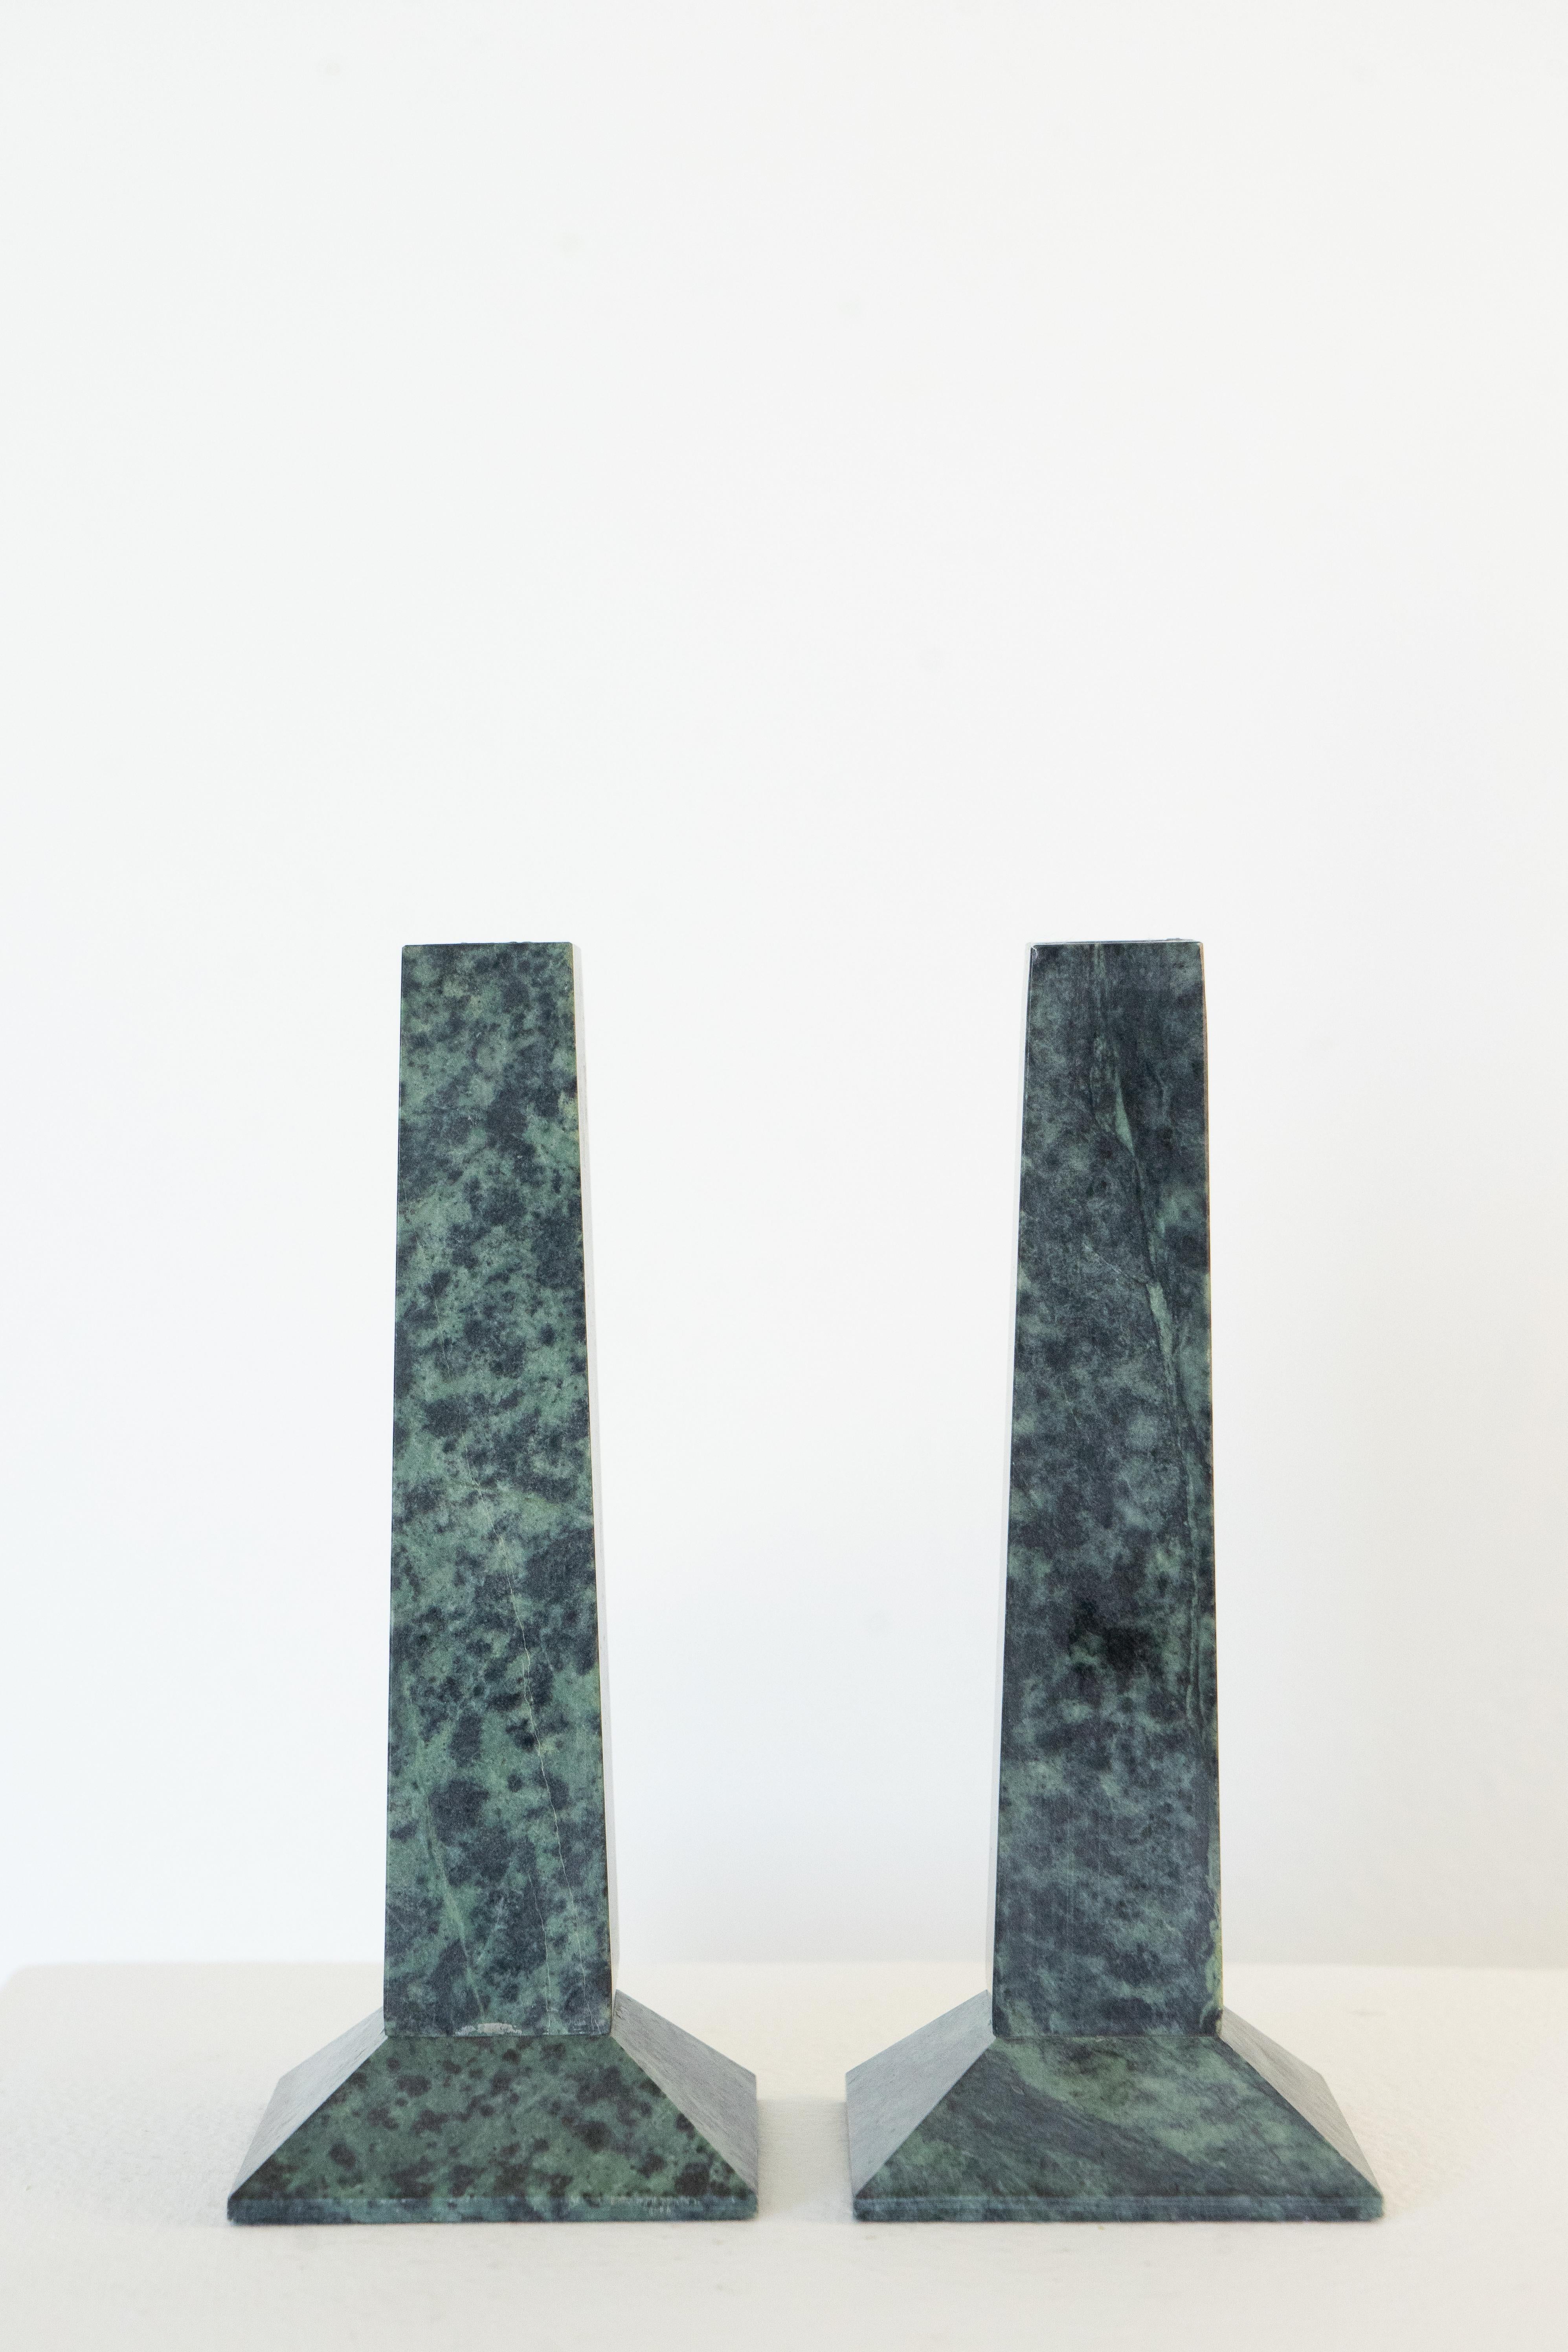 Beautifully shaped organic Green Marble candle holders Circa 1980s. 

Candlesticks have a great clean architectural design that is versatile and would compliment any style of interior decor. 

Would look great with Italian Modern, Mid-Century